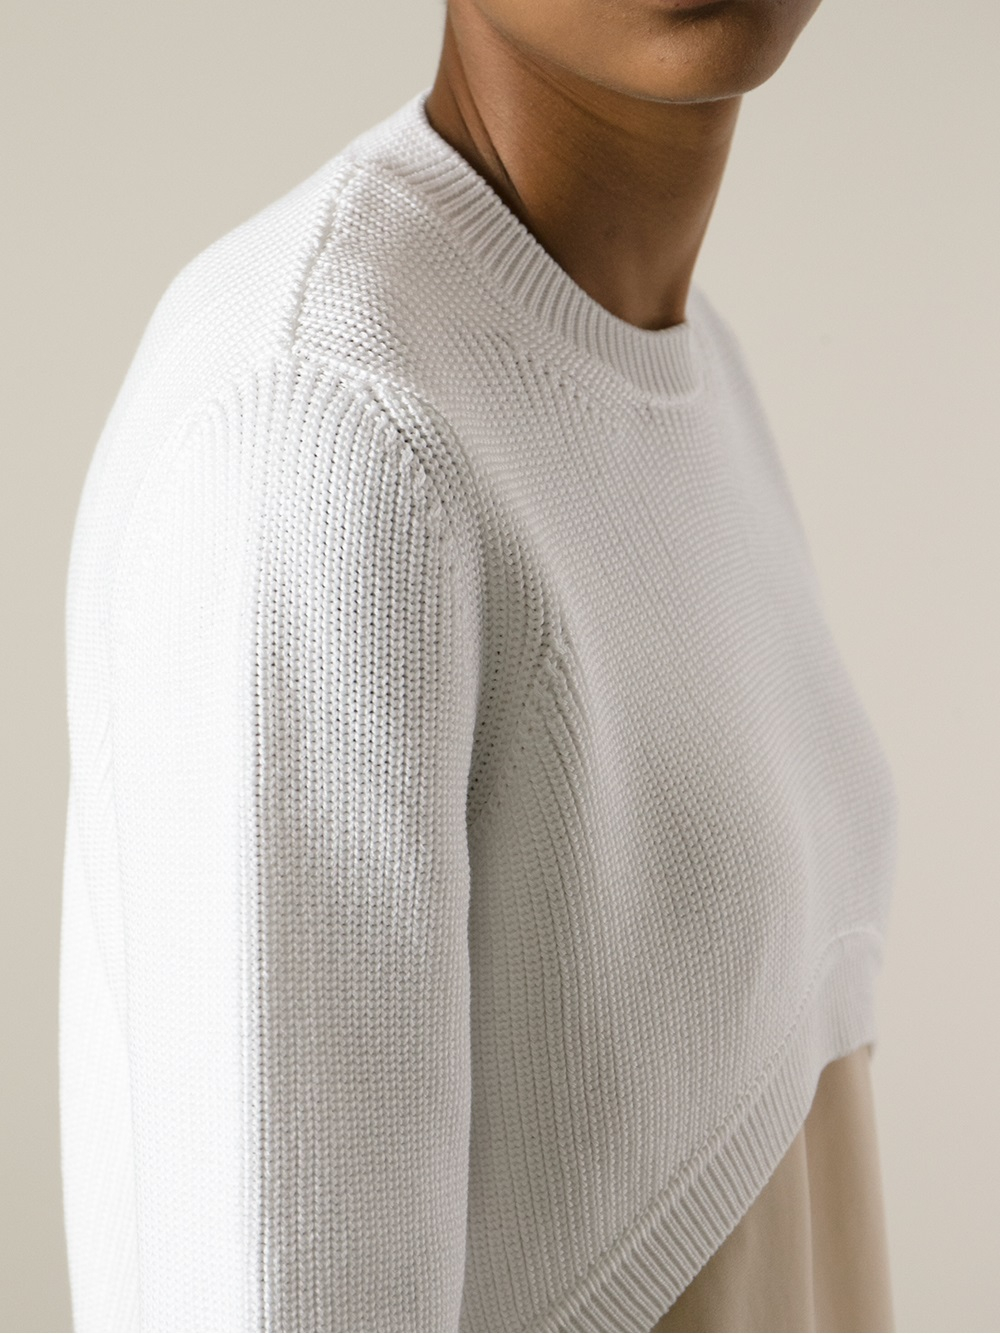 Givenchy Cropped Sweater in White - Lyst